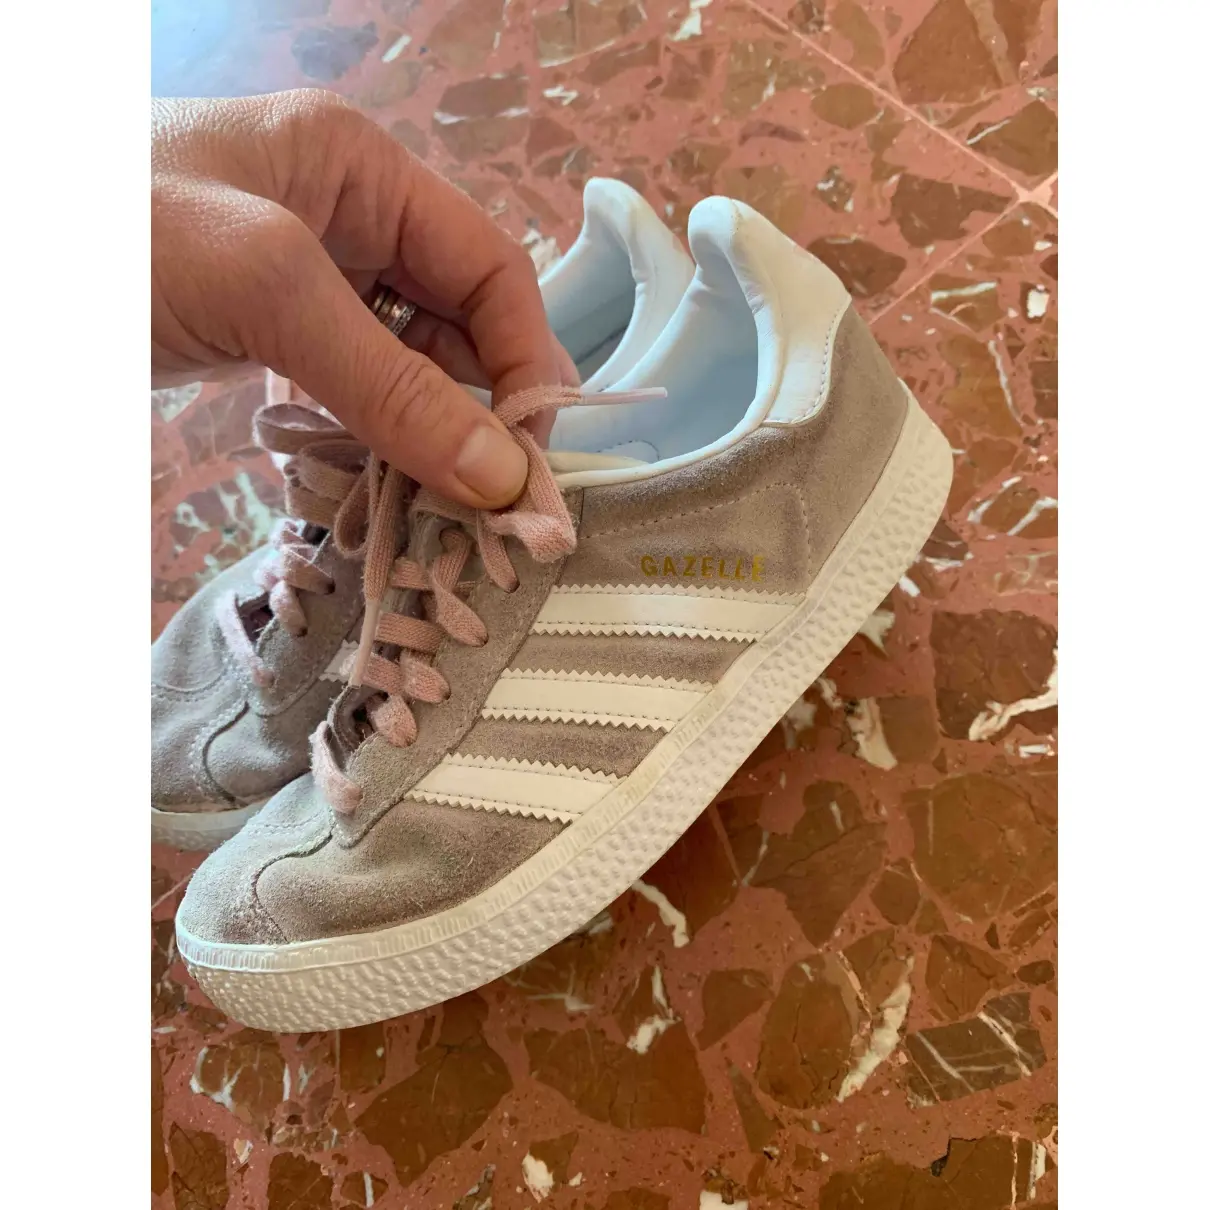 Adidas Gazelle trainers for sale